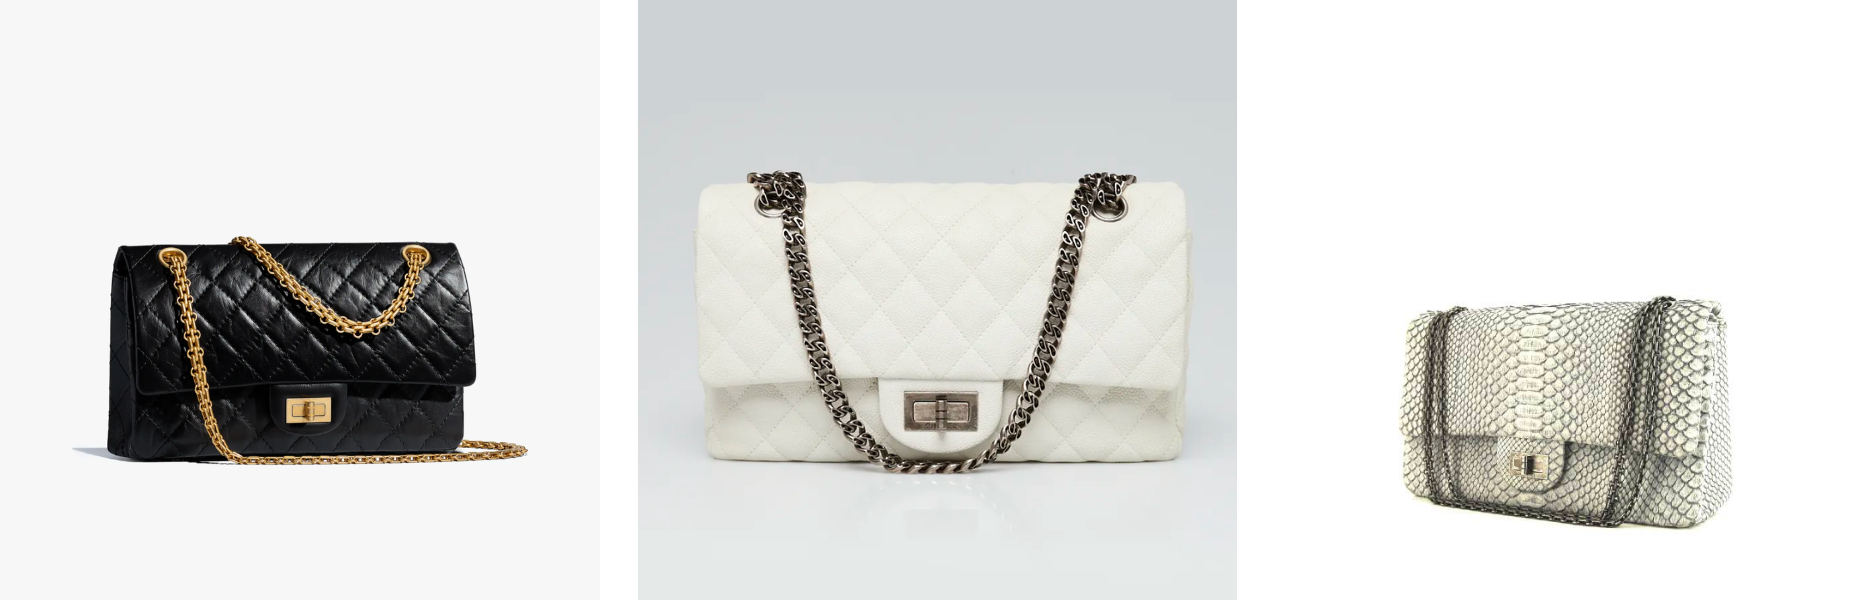 Chanel Lambskin Leather Bag - 1,056 For Sale on 1stDibs